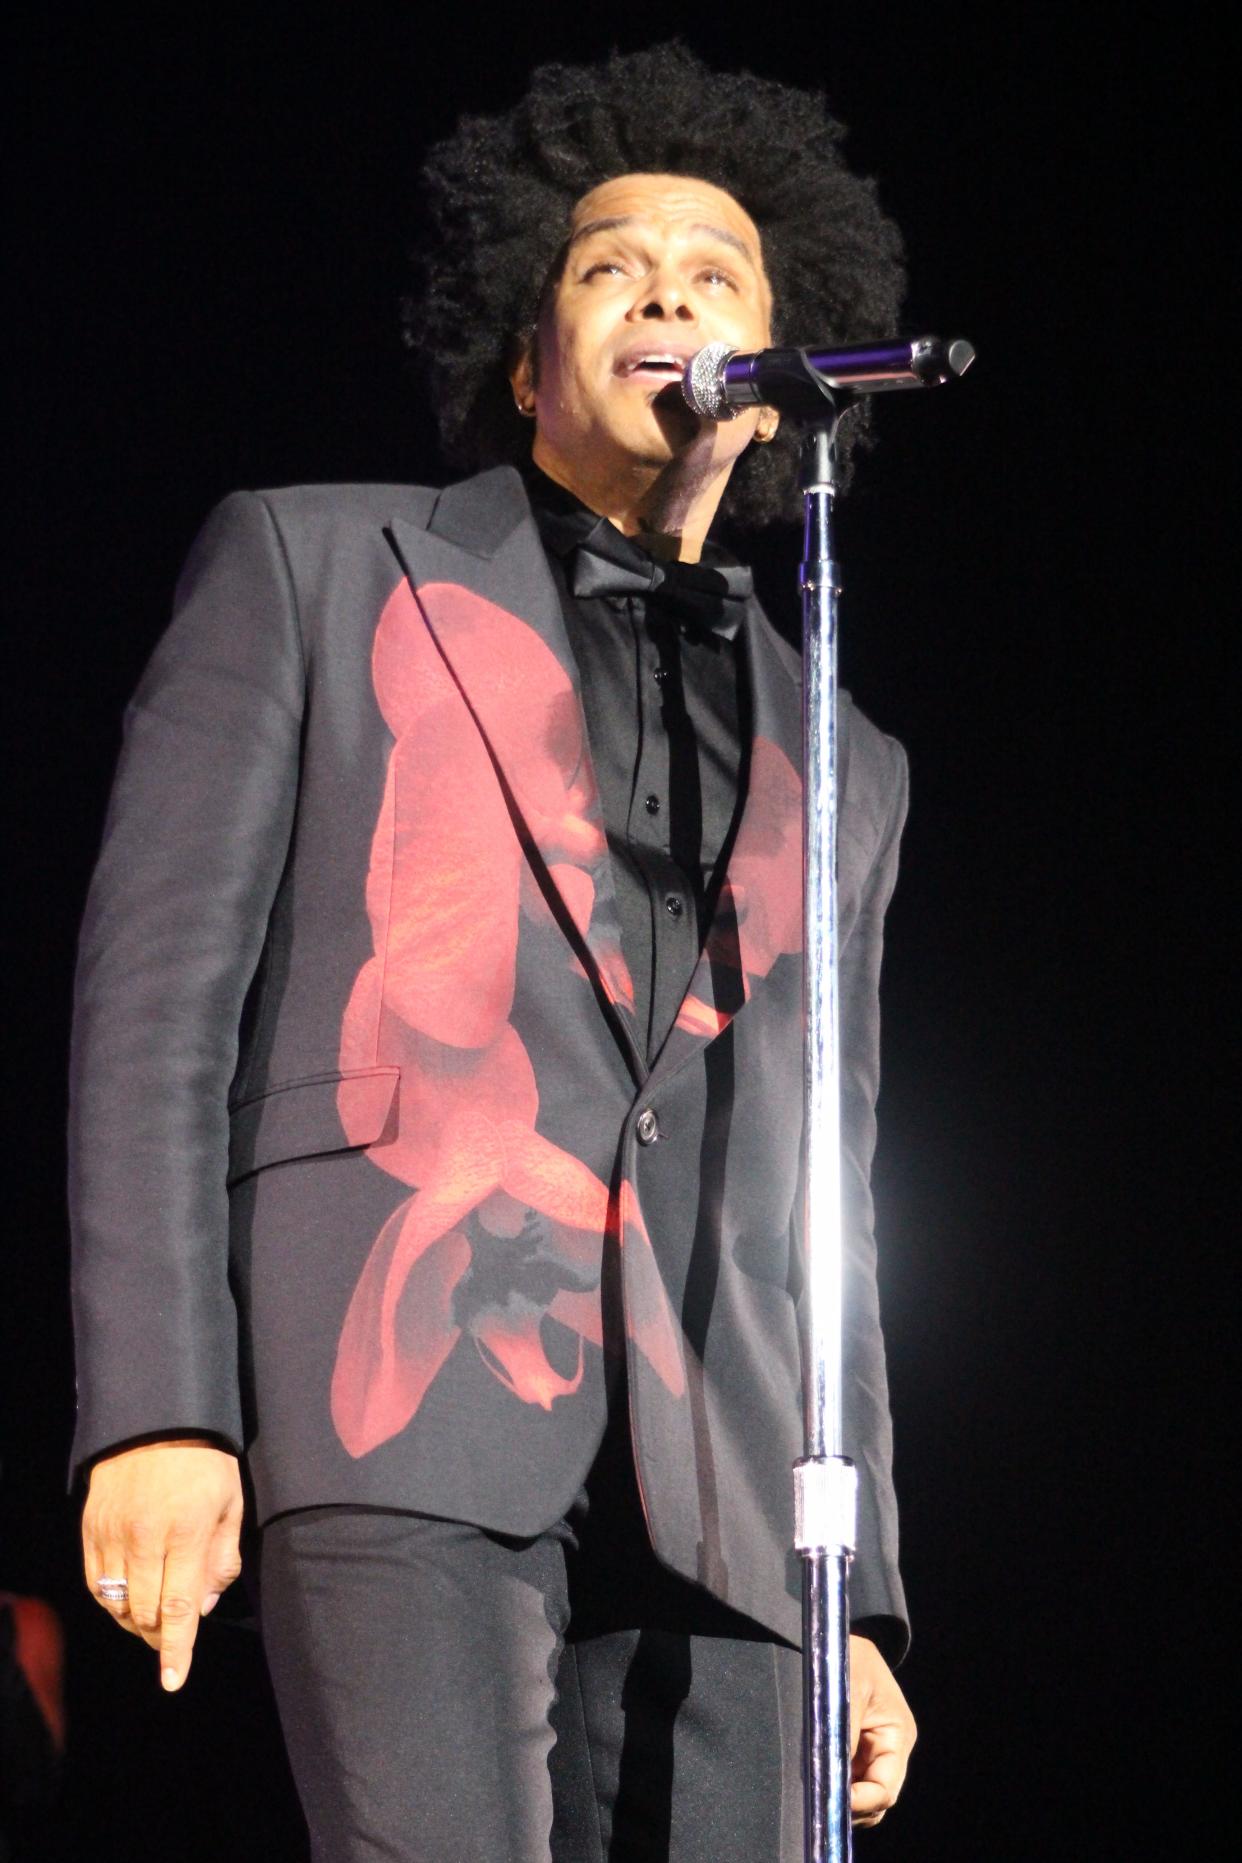 R&B singer Maxwell, with opening act BJ the Chicago Kid, performed at the Crown Coliseum in Fayetteville on Oct. 20, 2023, during Night: The Trilogy Tour.
(Credit: Rakeem "Keem" Jones for The Fayetteville Observer)